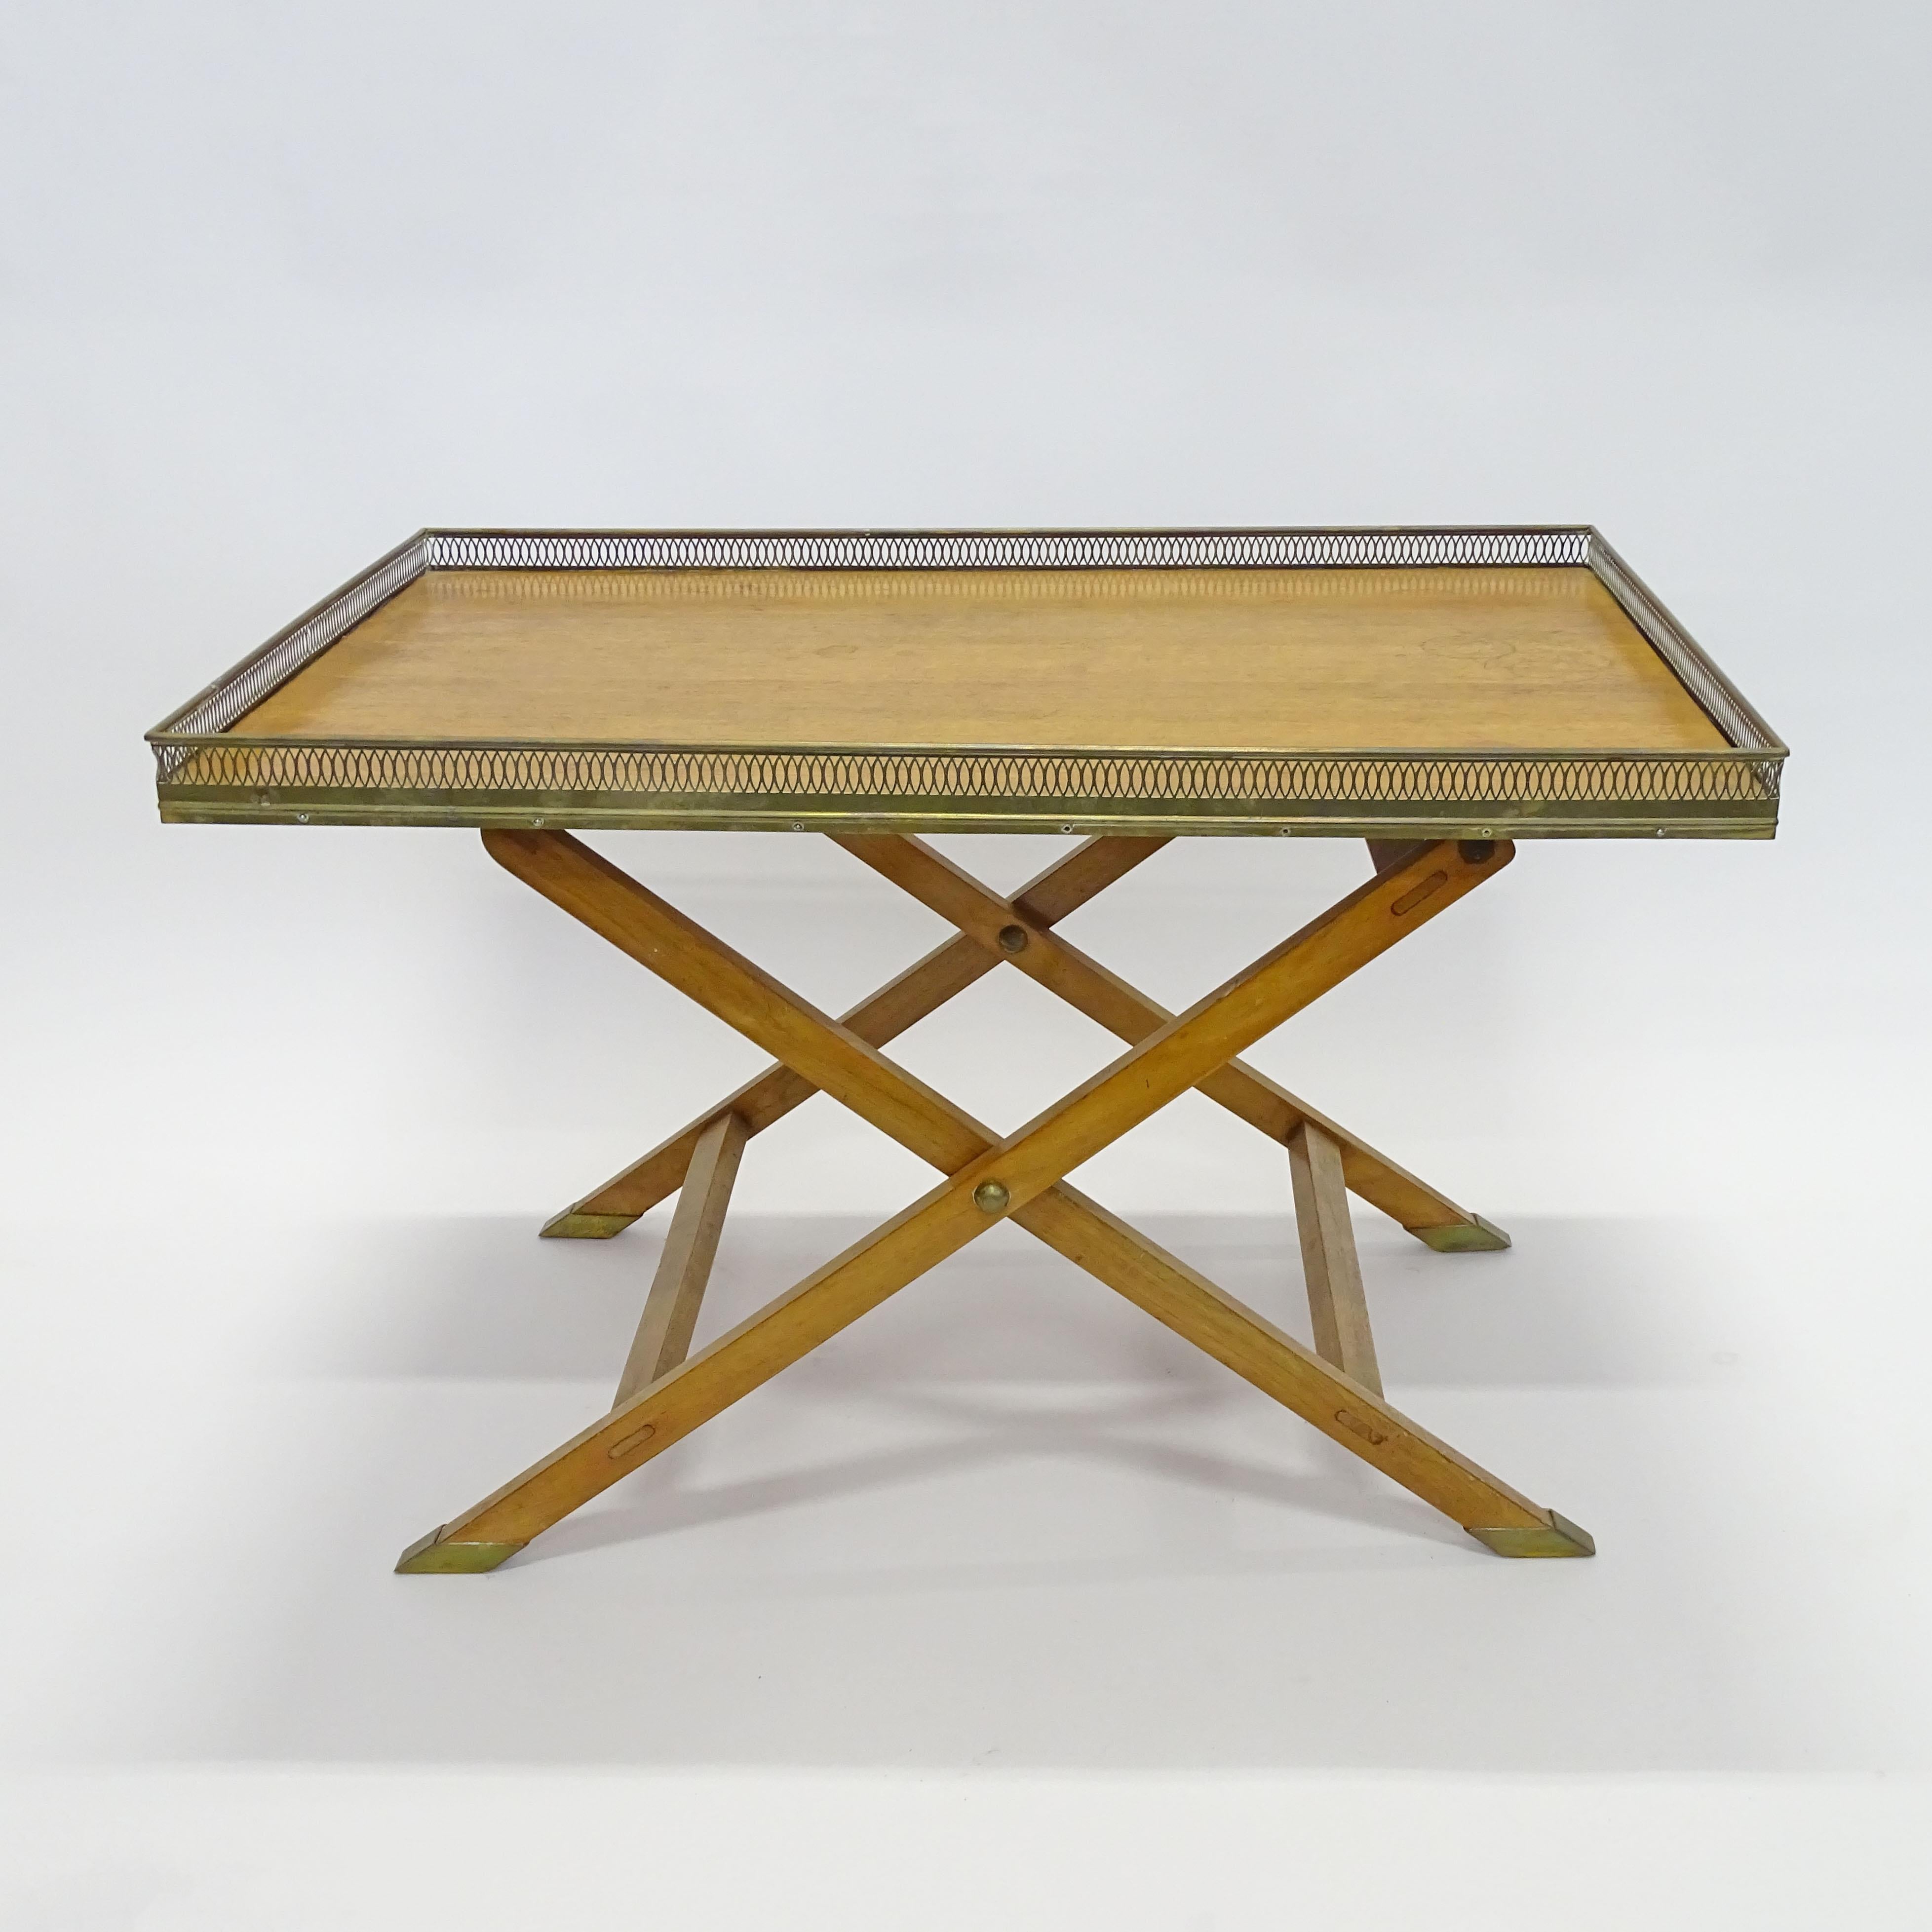 Splendid Wood and brass folding coffee table, very similar to the table 'BORD FLAMMES' by Maria Pergay.
Italy 1950s.